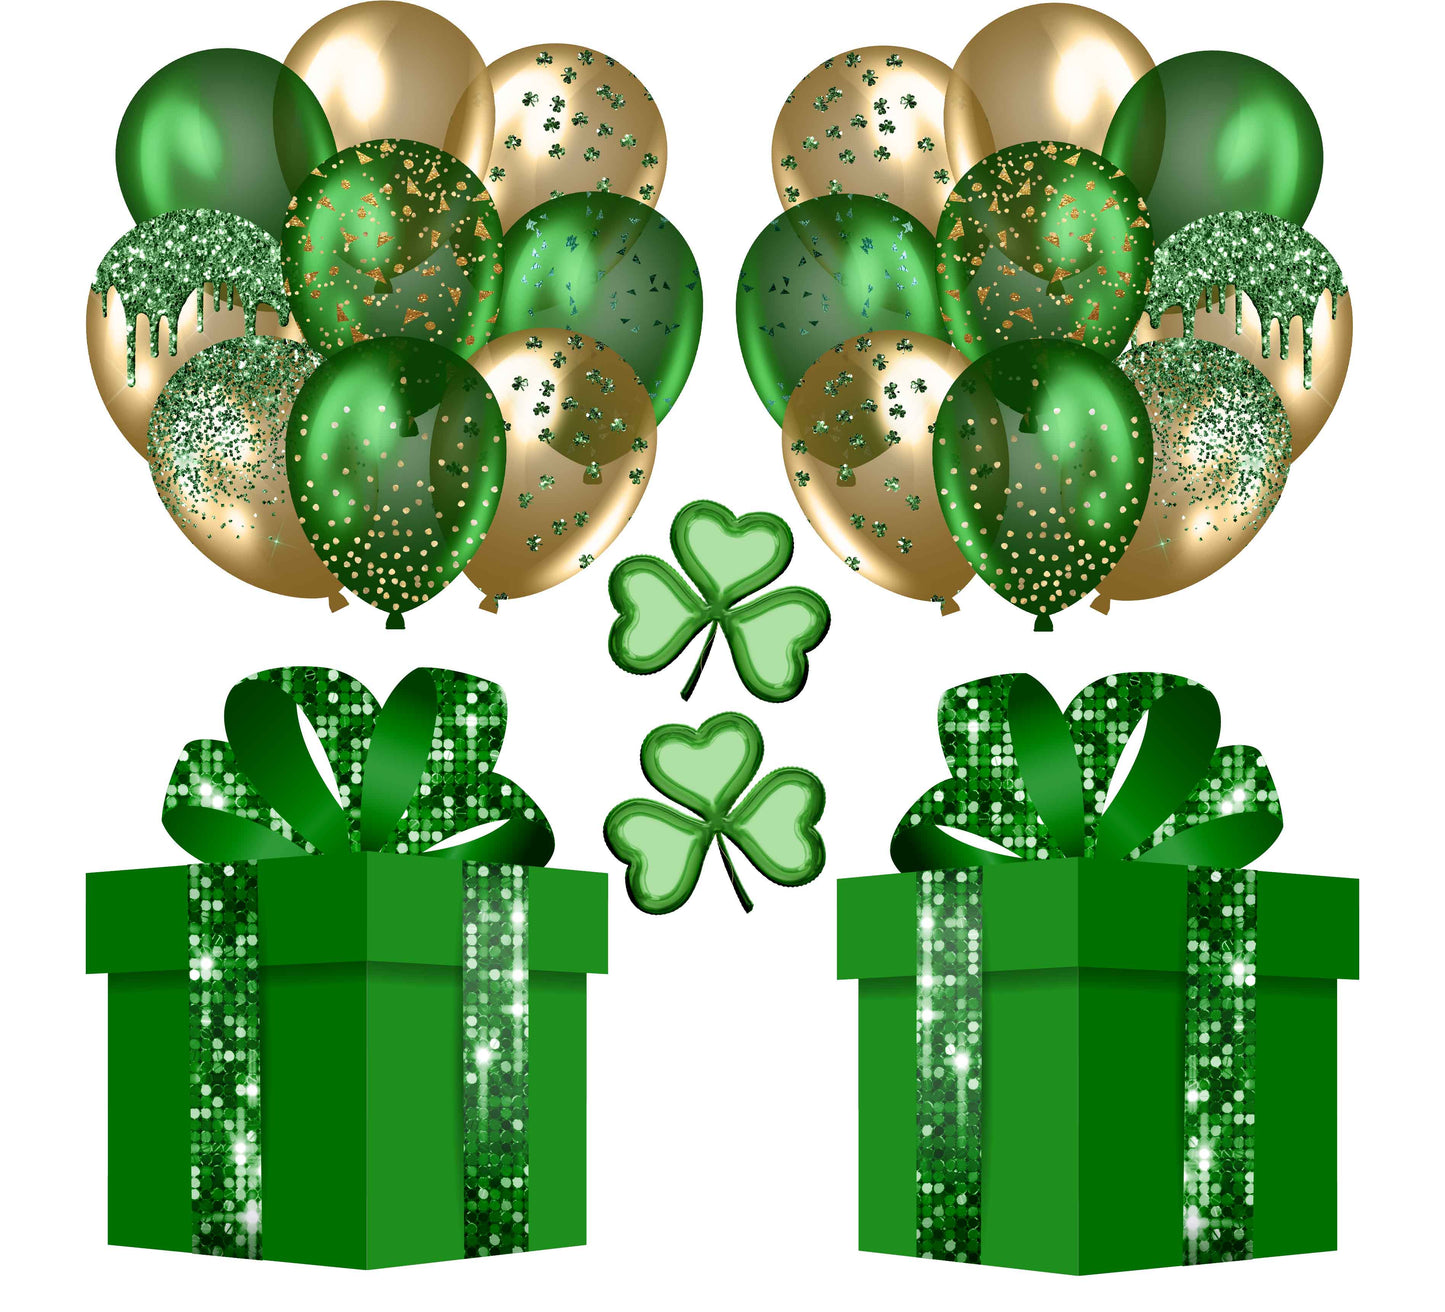 St. Patricks Day Balloons Set 2 - Green Half Sheet  (Must Purchase 2 Half sheets - You Can Mix & Match)